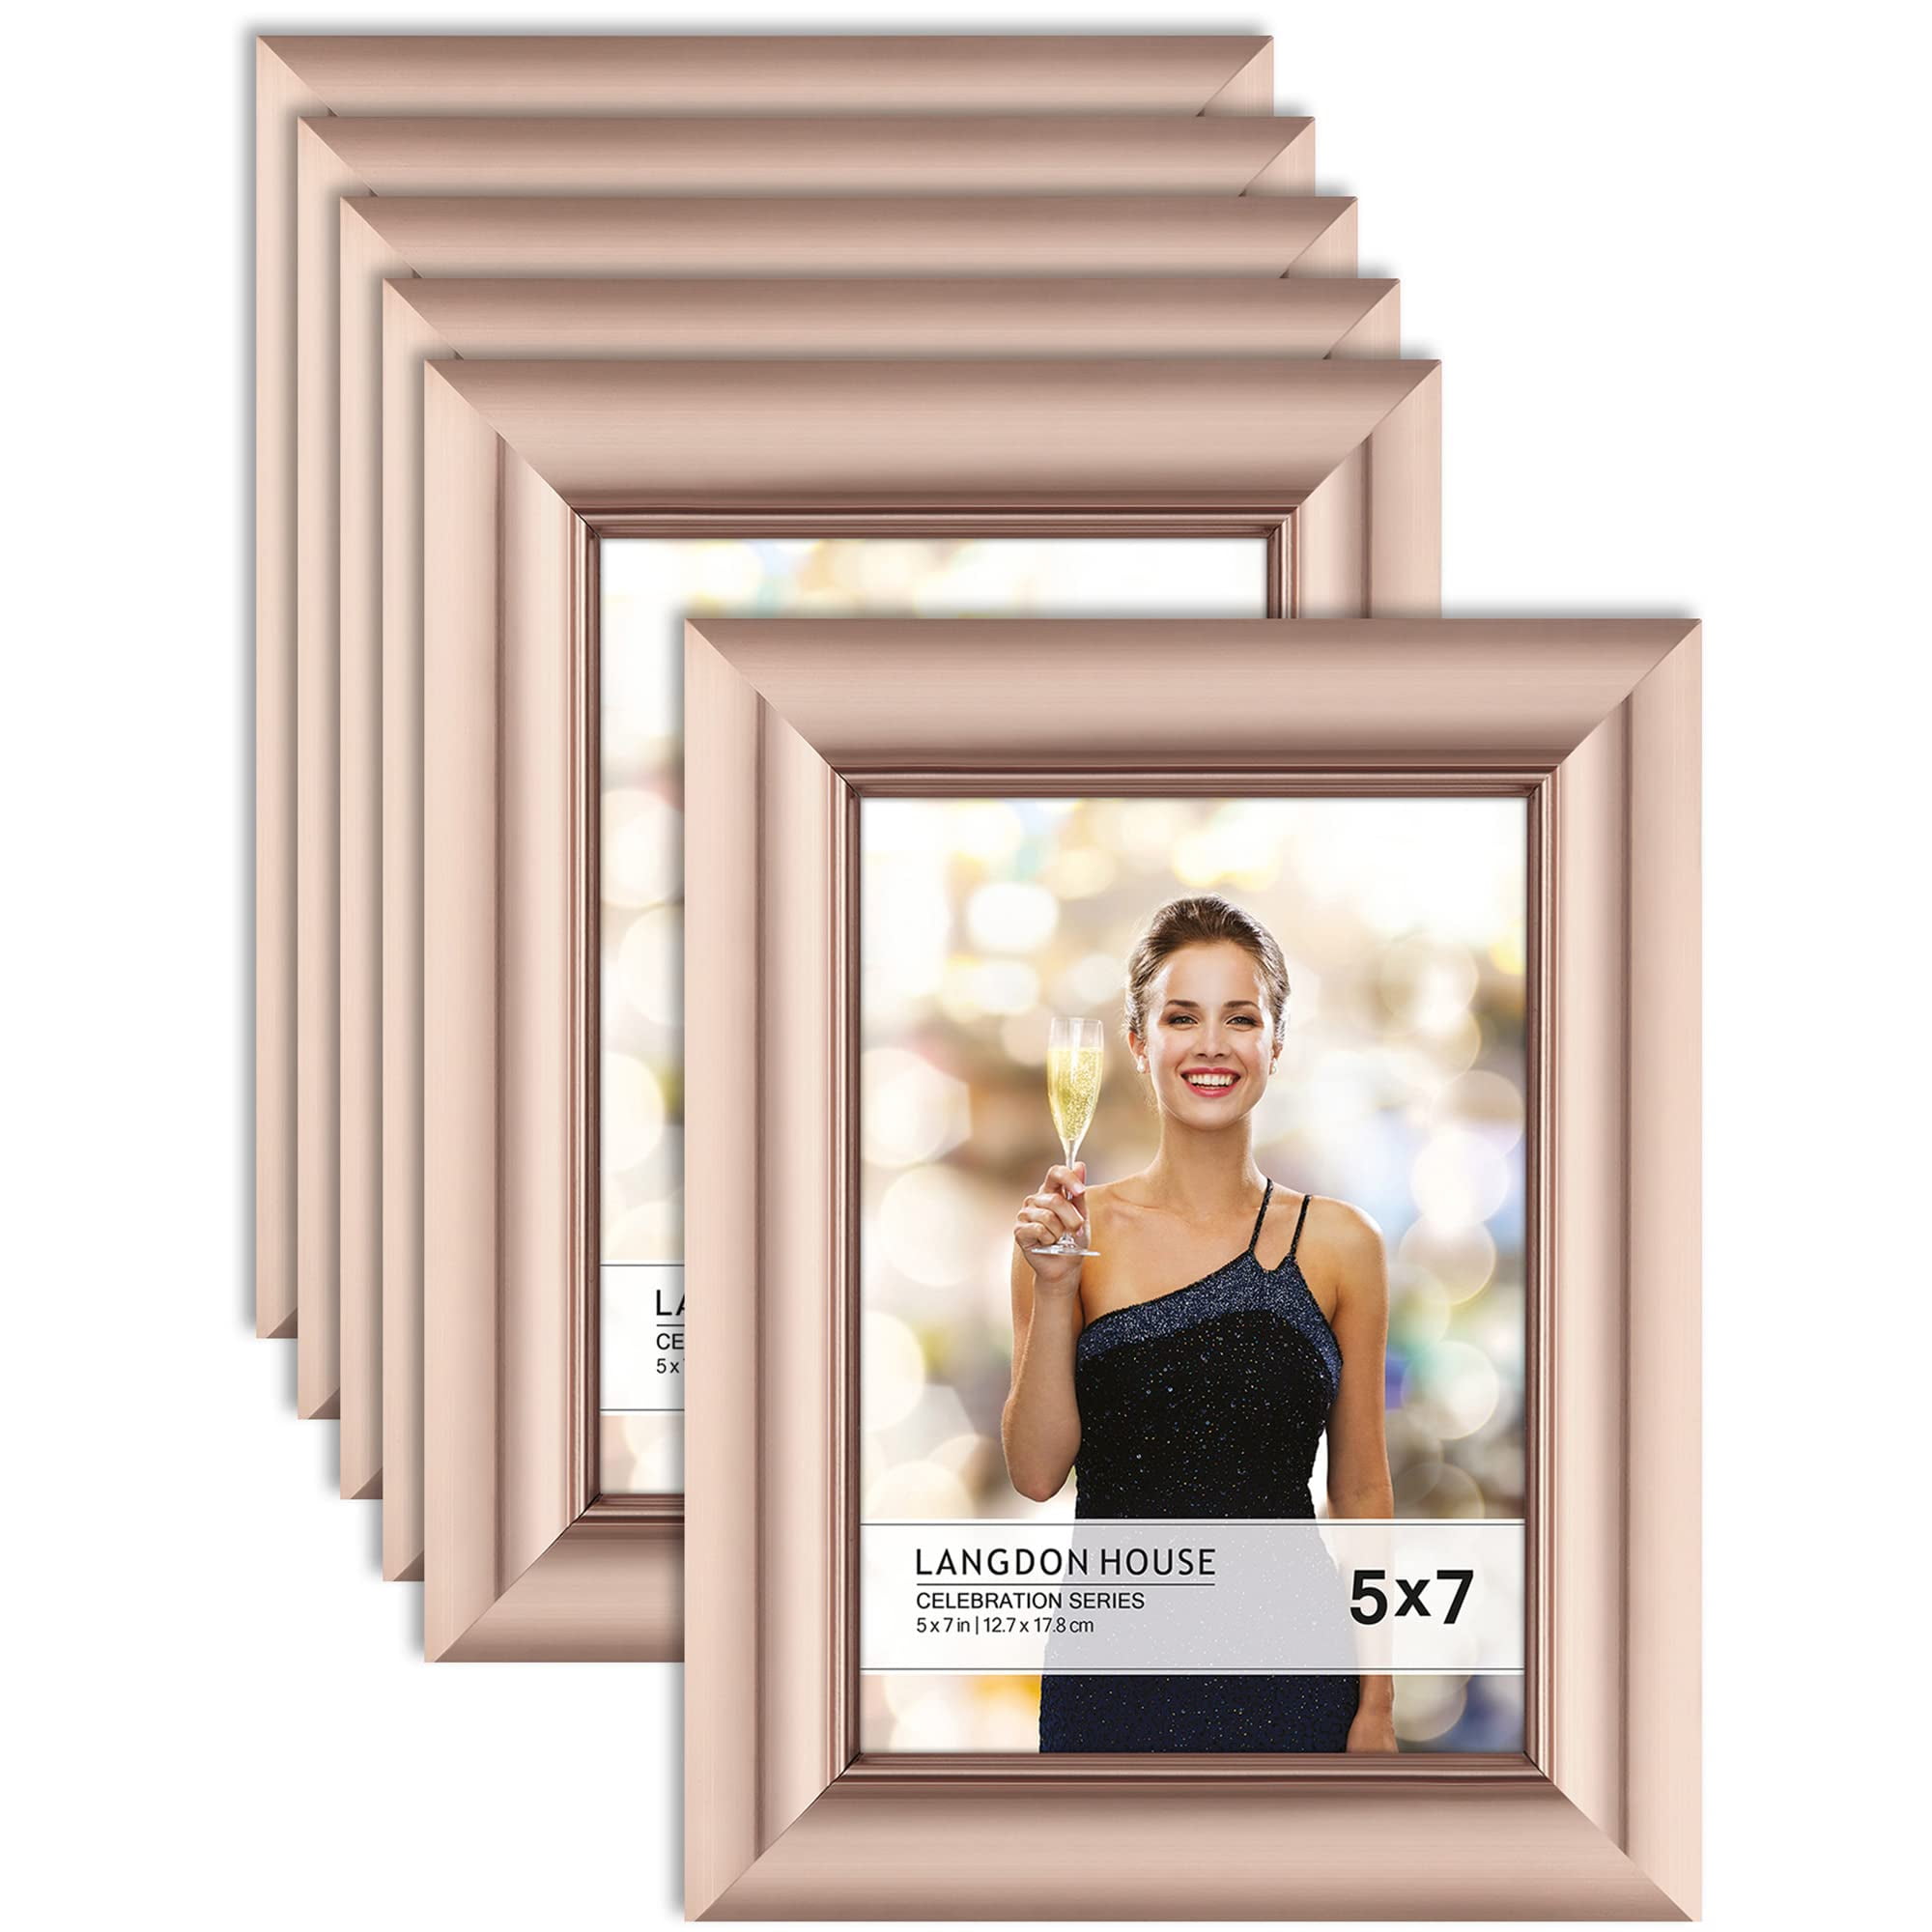 Dazzling Displays 10 Acrylic 7" x 5" Slanted Picture Frame Holders 